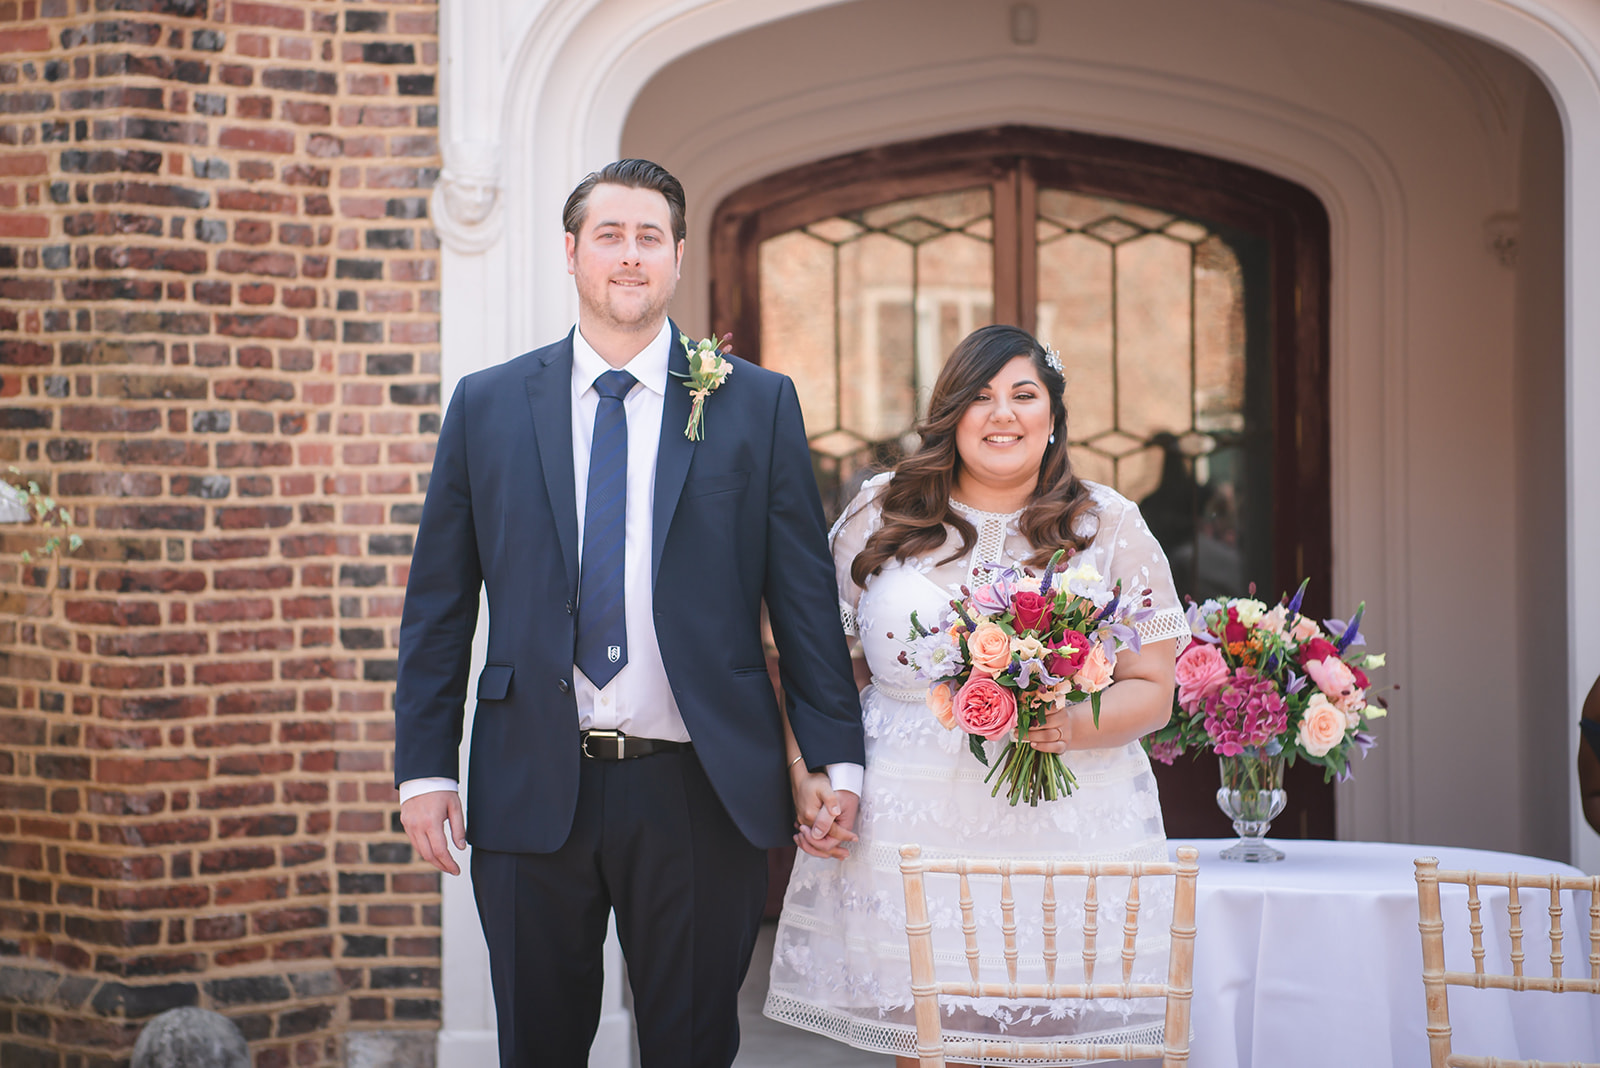 Nikita and Chris's wedding ceremony at the Fulham Palace